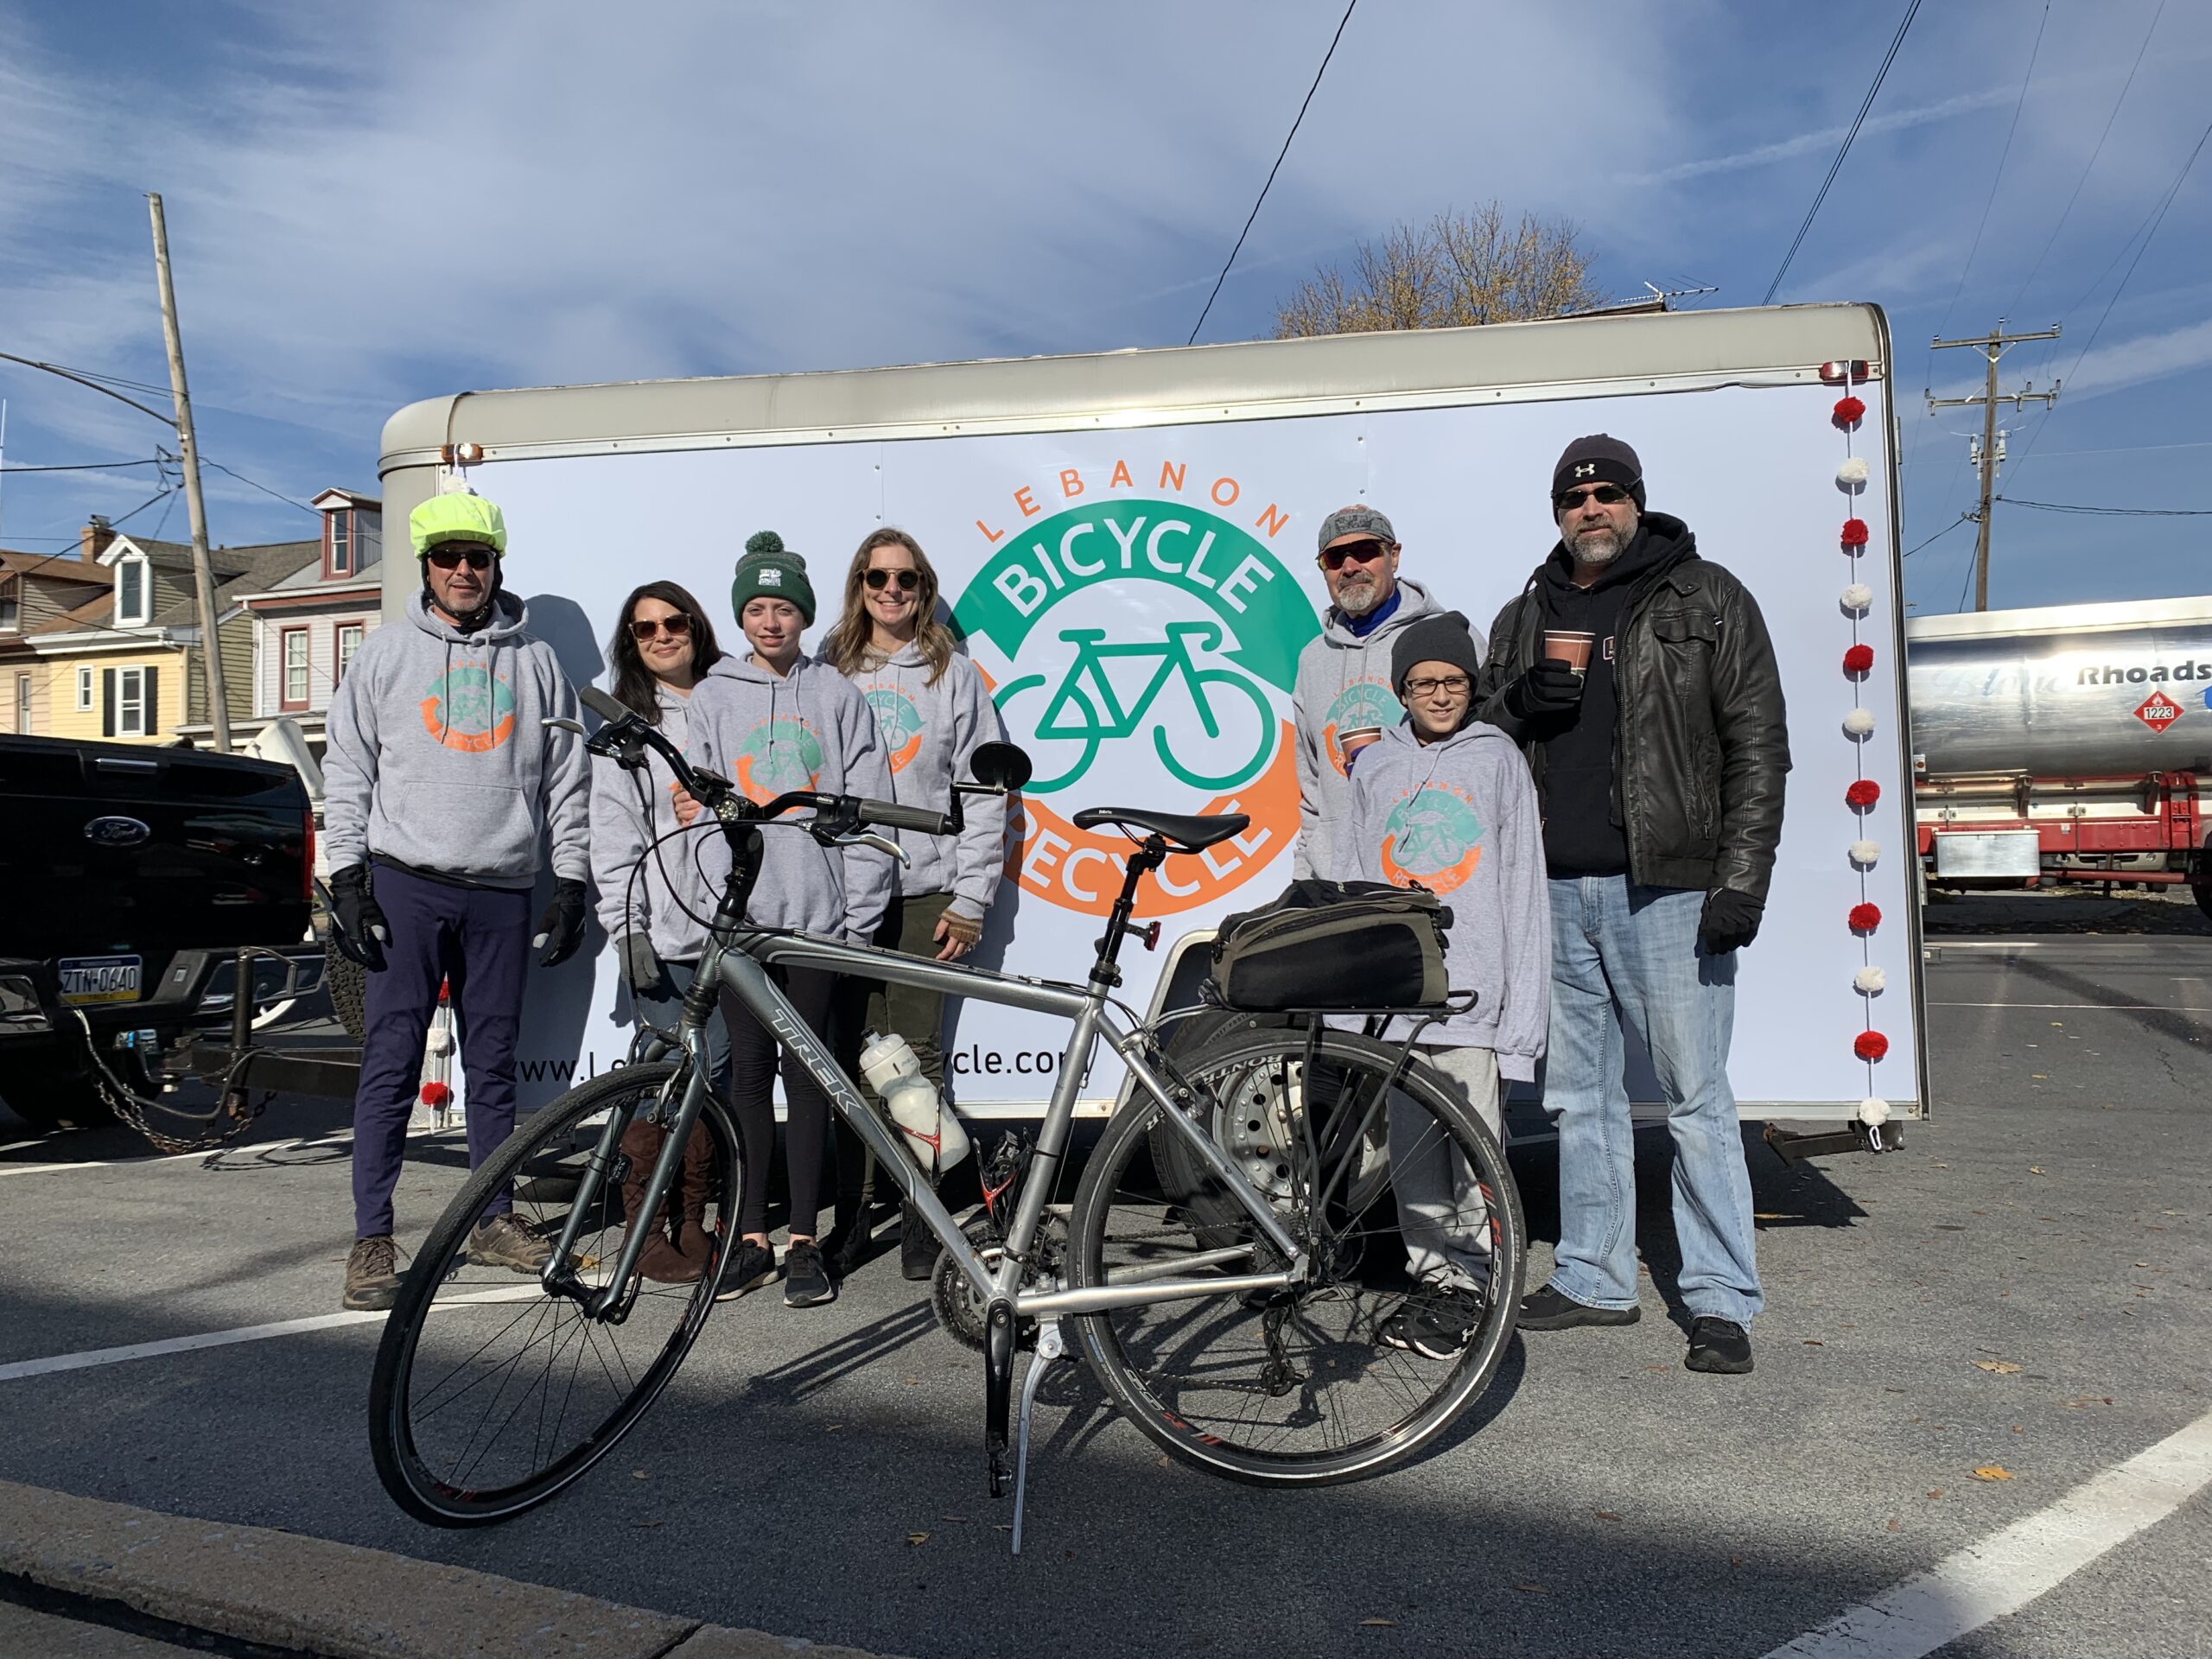 Lebanon Bicycle Recycle team pictured with program trailer and a bicycle